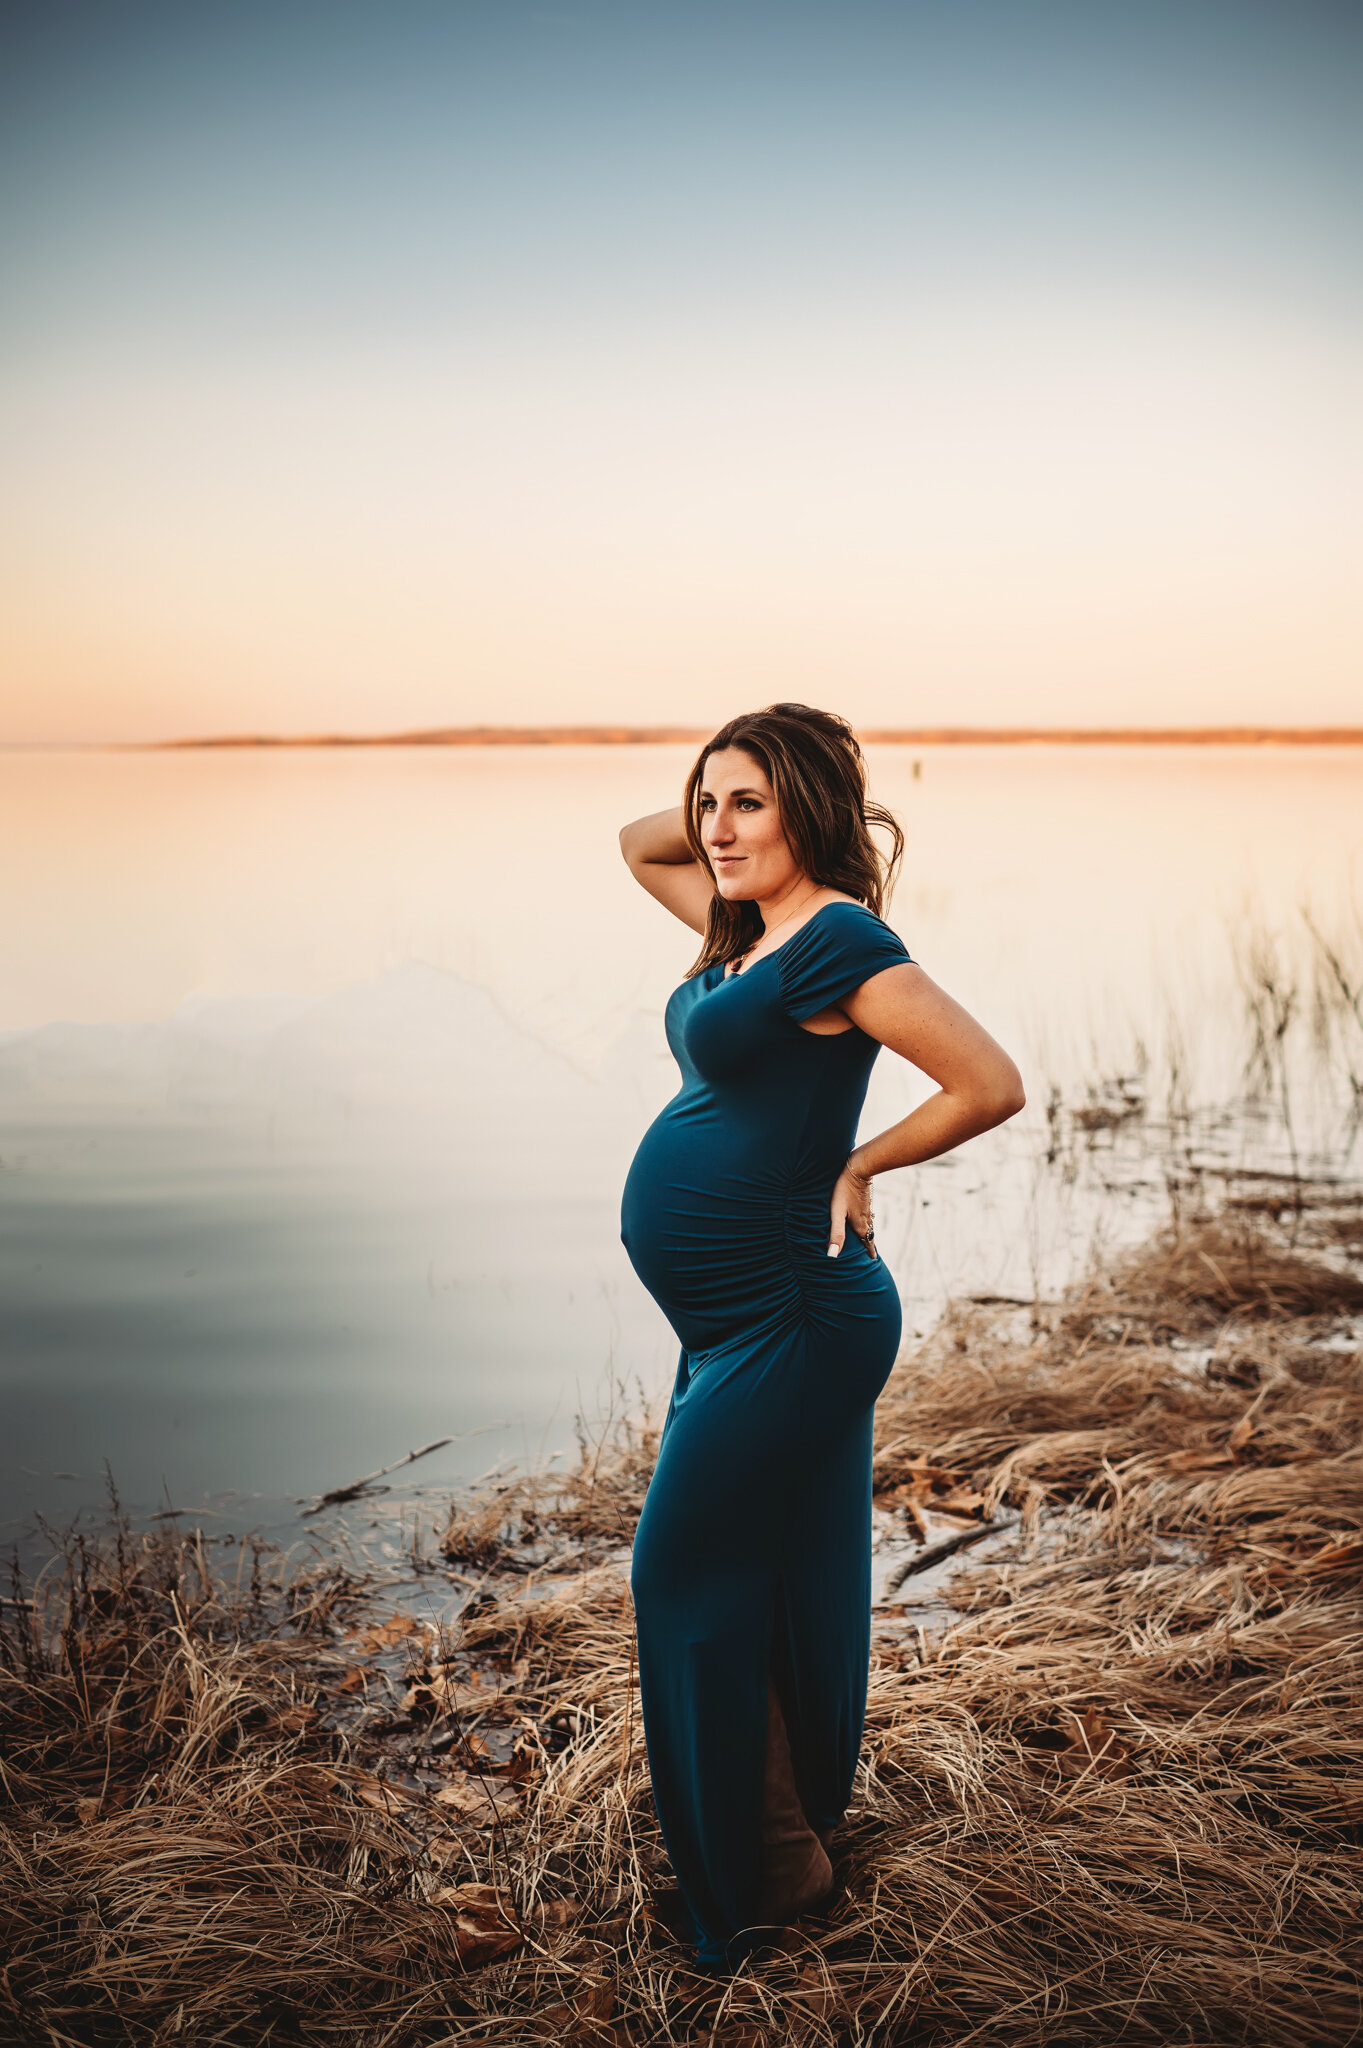 peoria IL maternity, glamorous pregnant mom poses near water with sunset wearing blue maternity dress